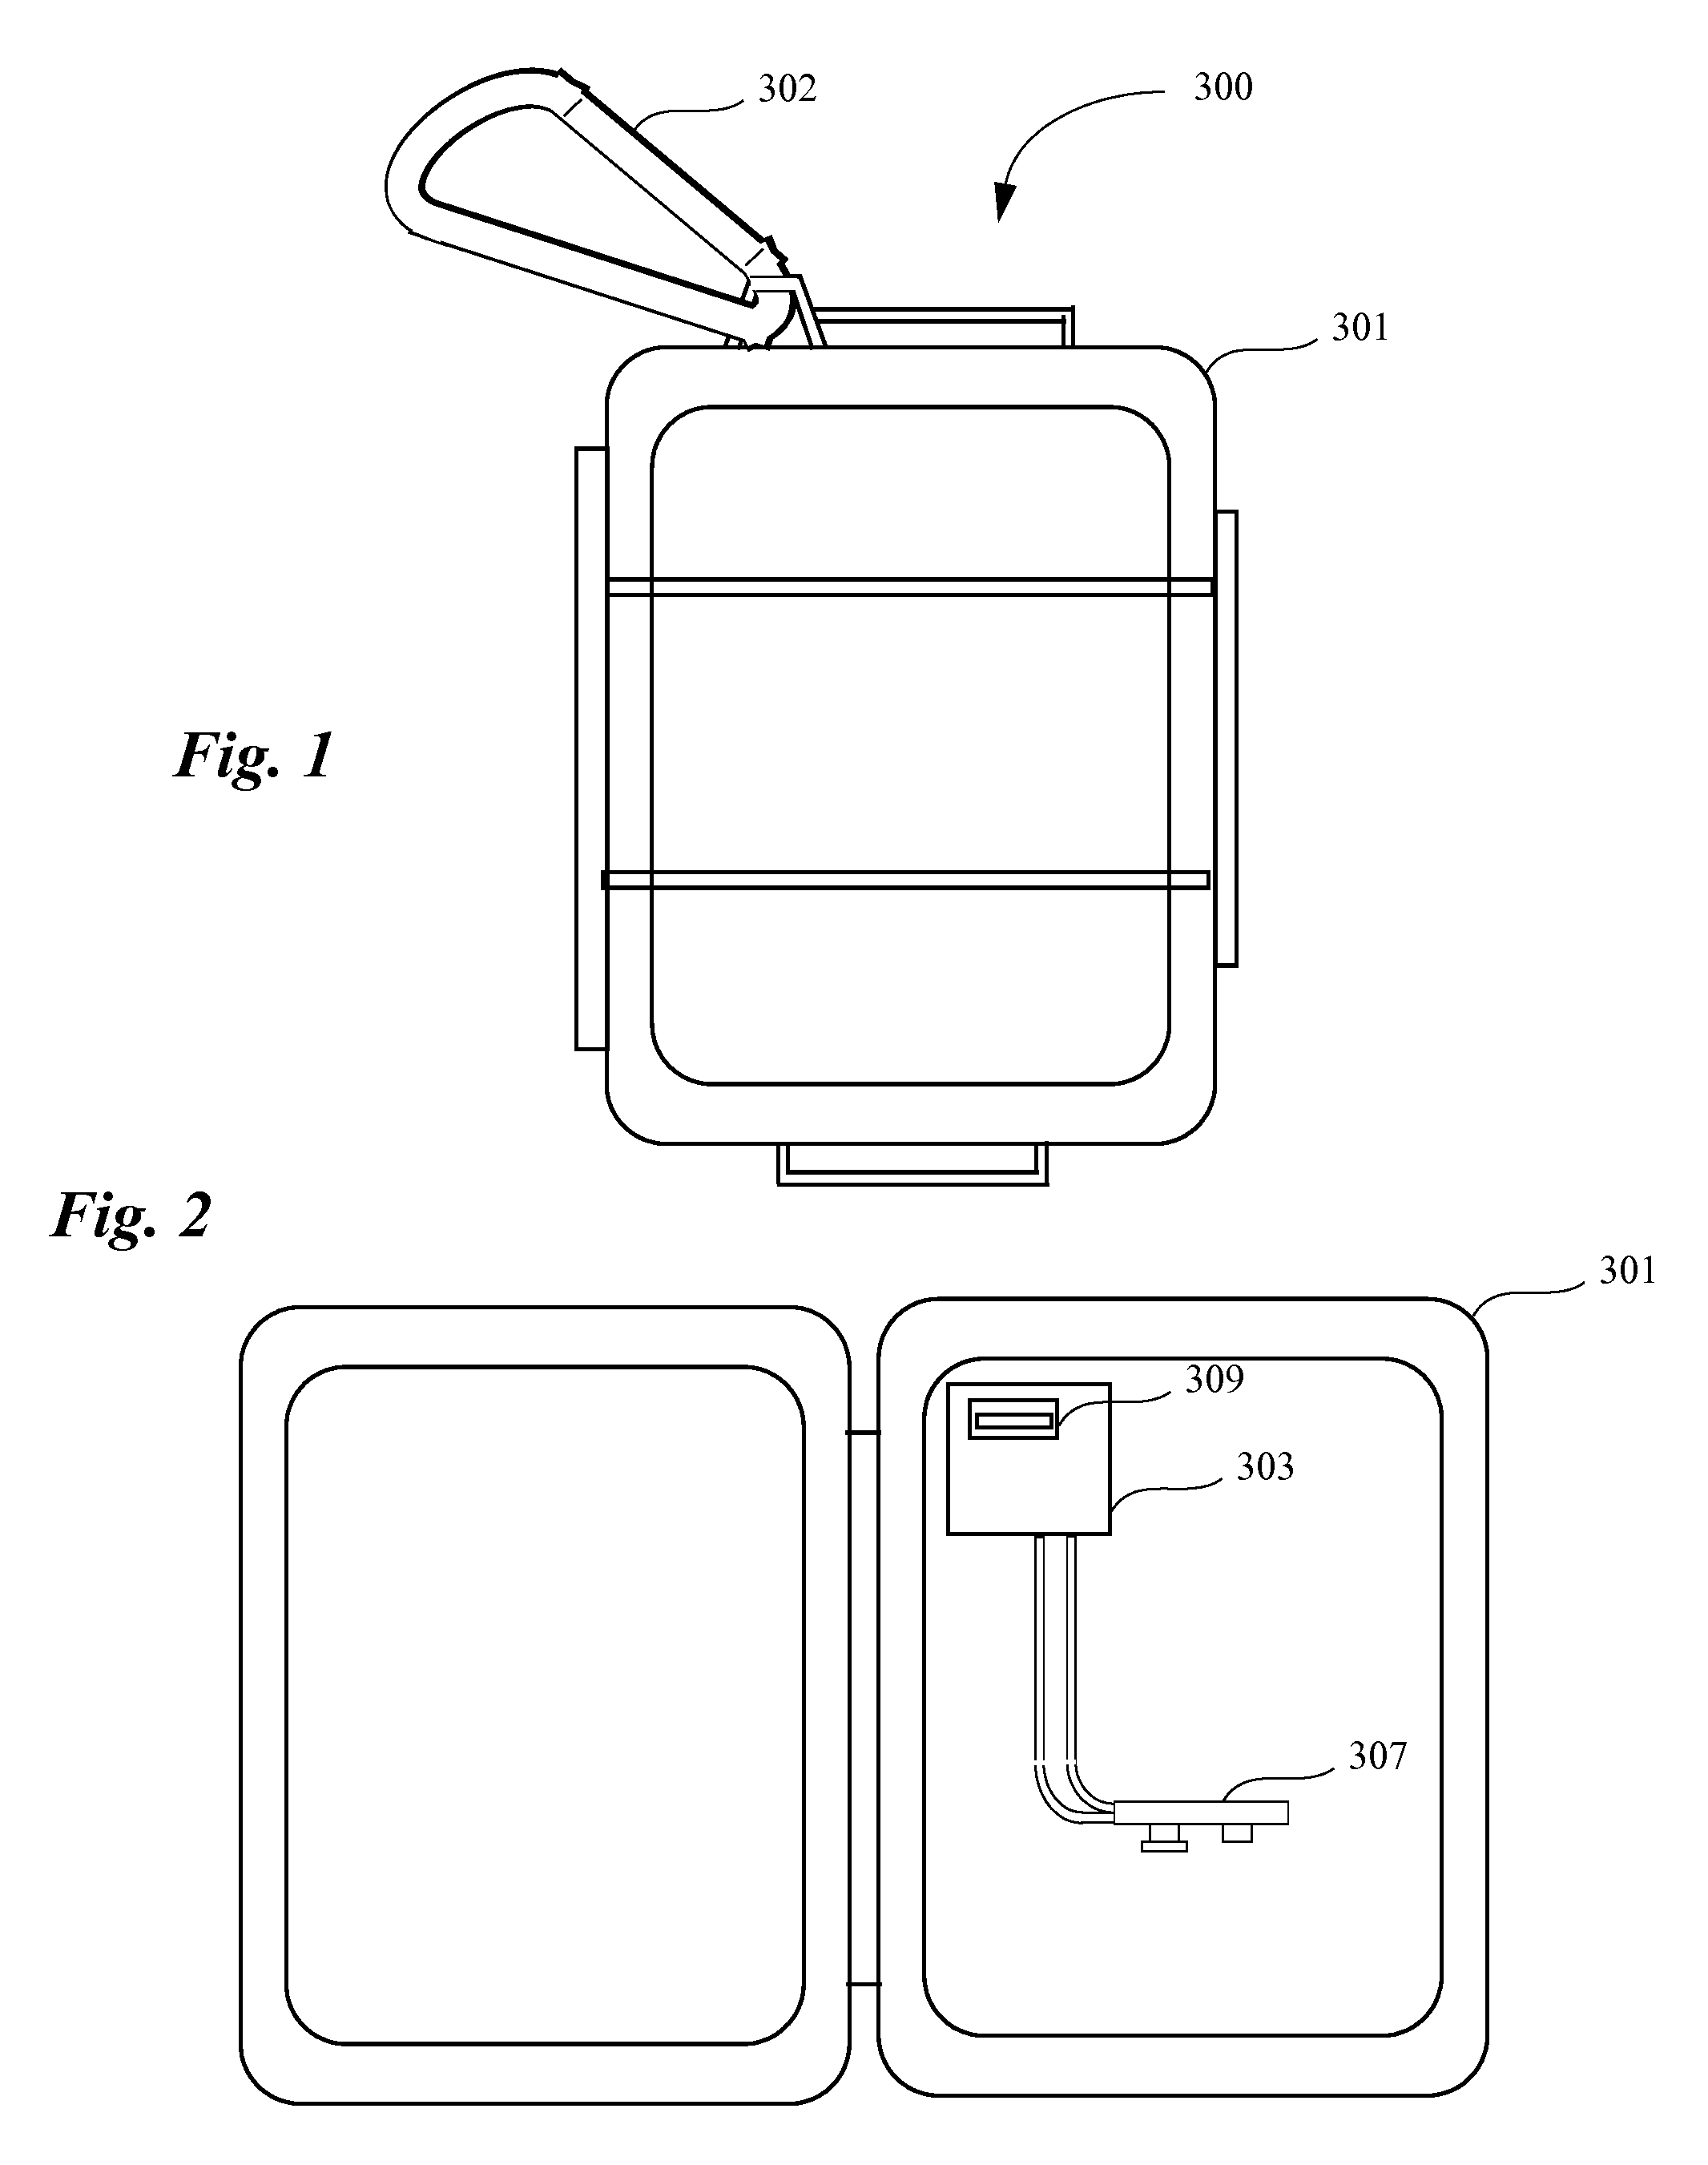 Emergency charging and fast charging for mobile electronic devices